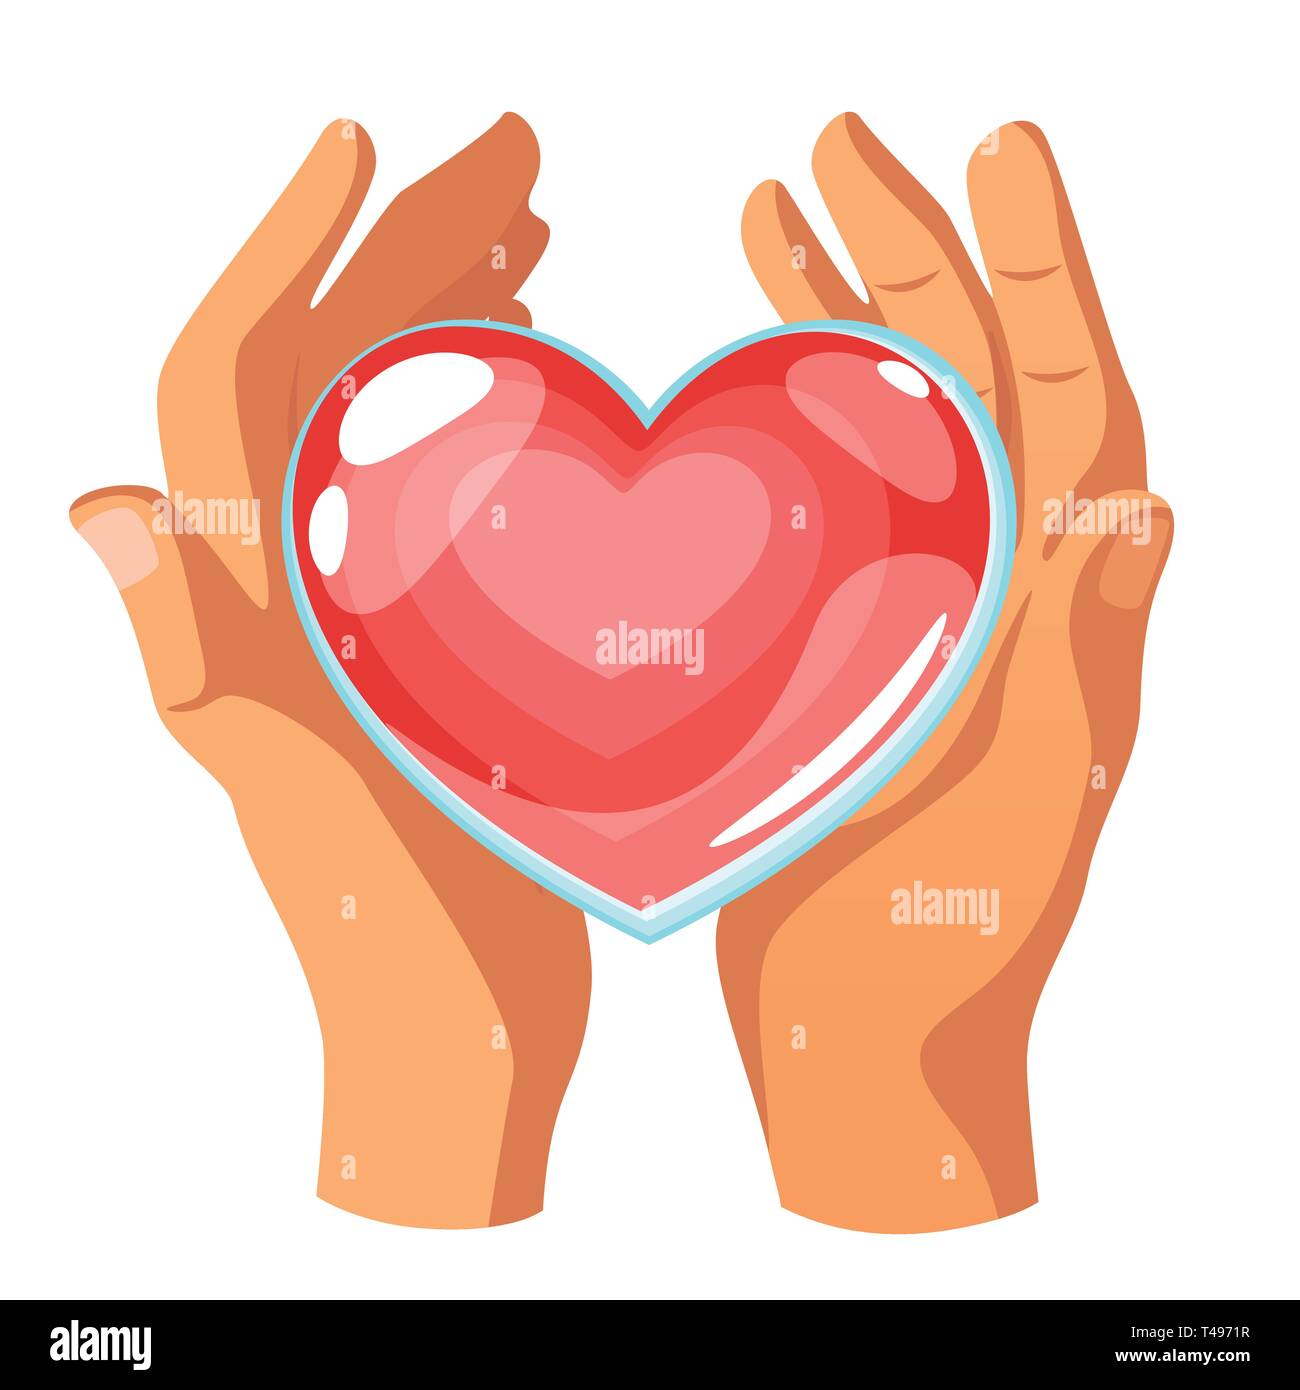 Health concept design template with hands holding heart. Vector illustration. Stock Vector